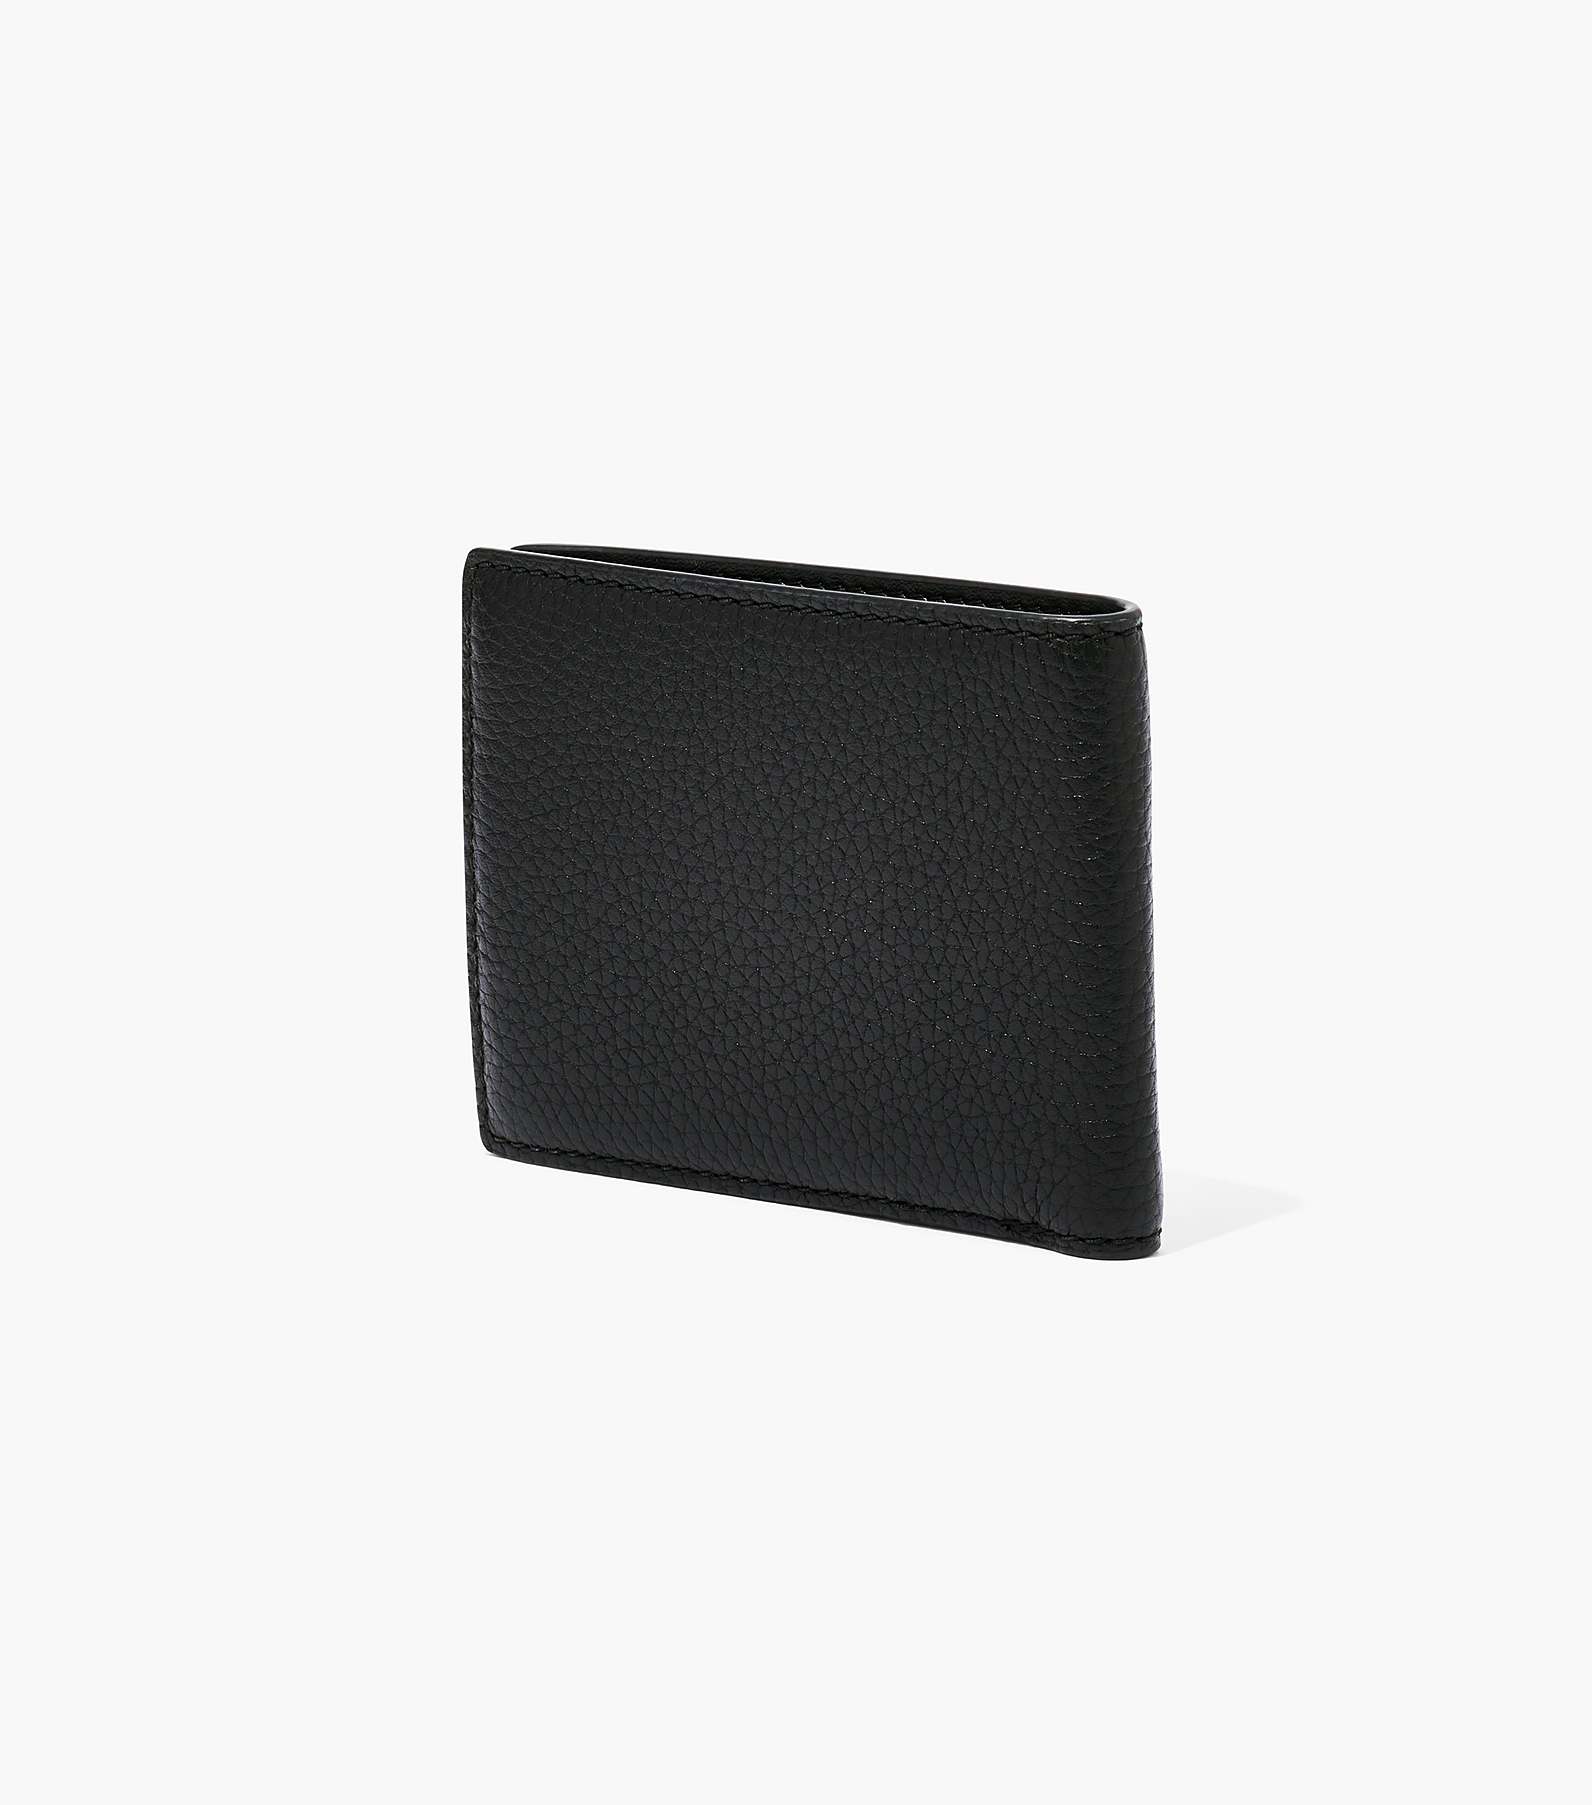 The Leather Billfold Wallet(View All Wallets)